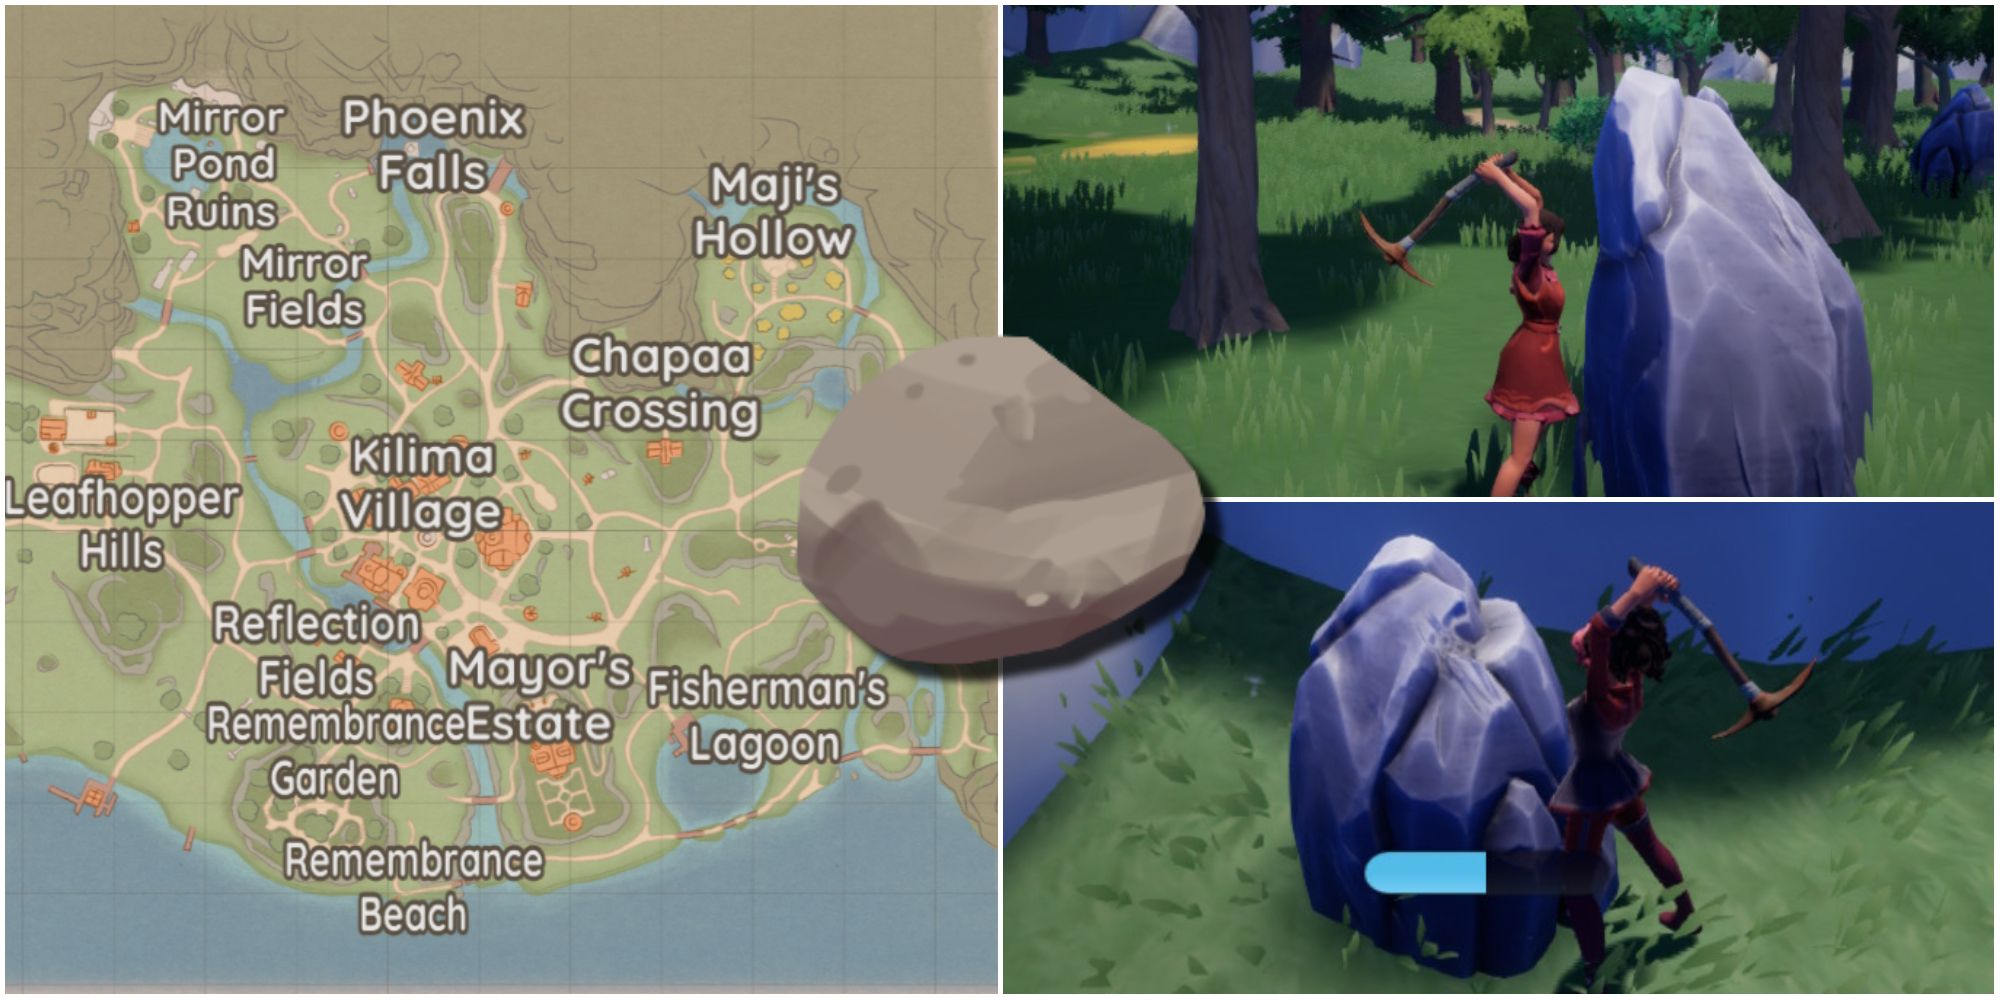 The map of Kilima and two images of a character mining stone at their home plot and at cliff bases